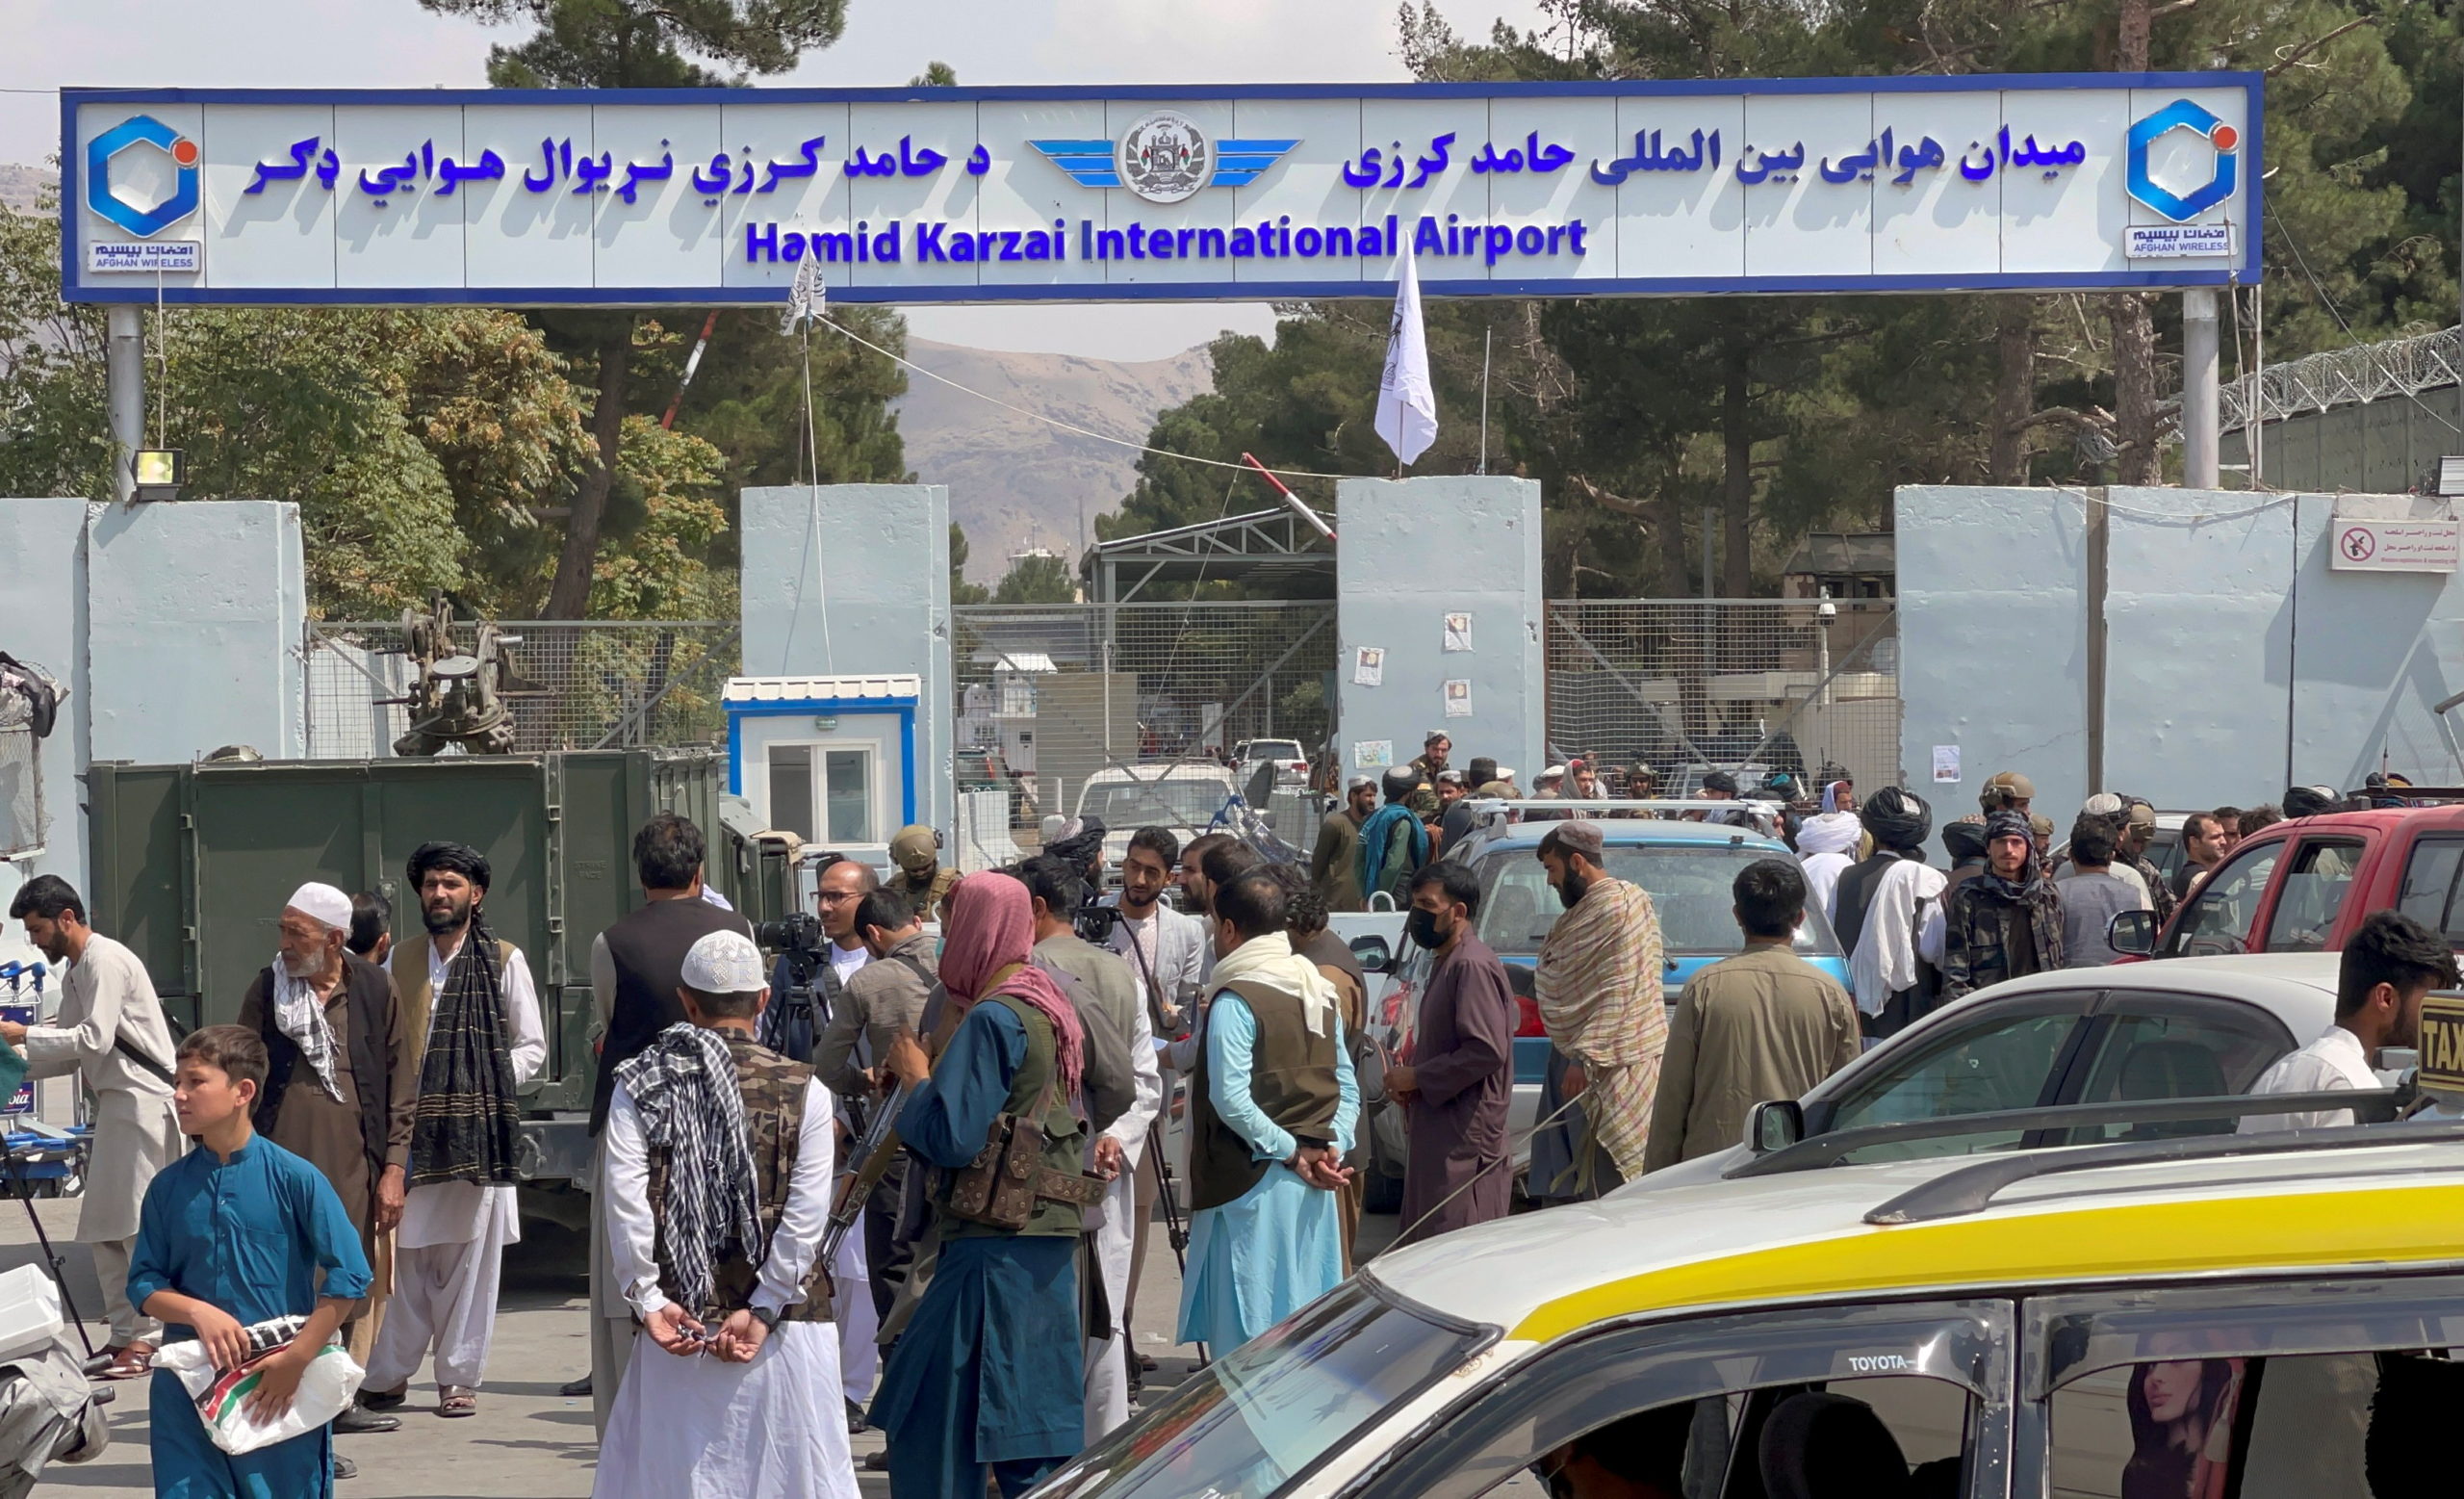 People gather at the entrance gate of Hamid Karzai International Airport a day after U.S troops withdrawal, in Kabul, Afghanistan August 31, 2021. REUTERS/Stringer